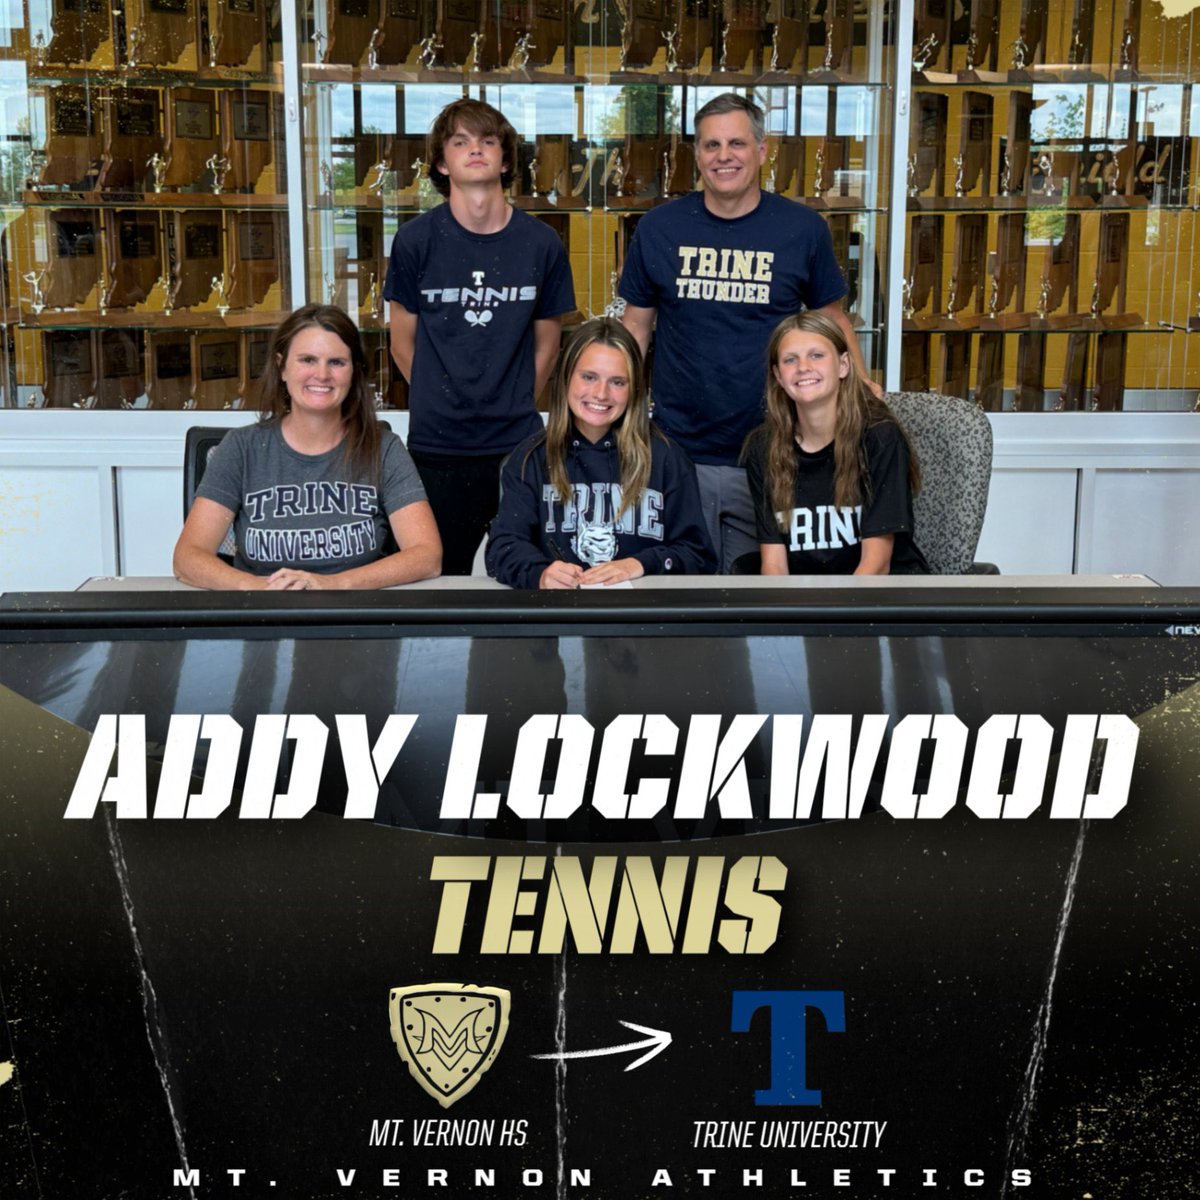 A huge congratulations to Addy Lockwood for committing to Trine University to play both Soccer and Tennis at the next level! Thank you for all of your dedication to the program and we can’t wait to watch you succeed! 

#DefendTheShield